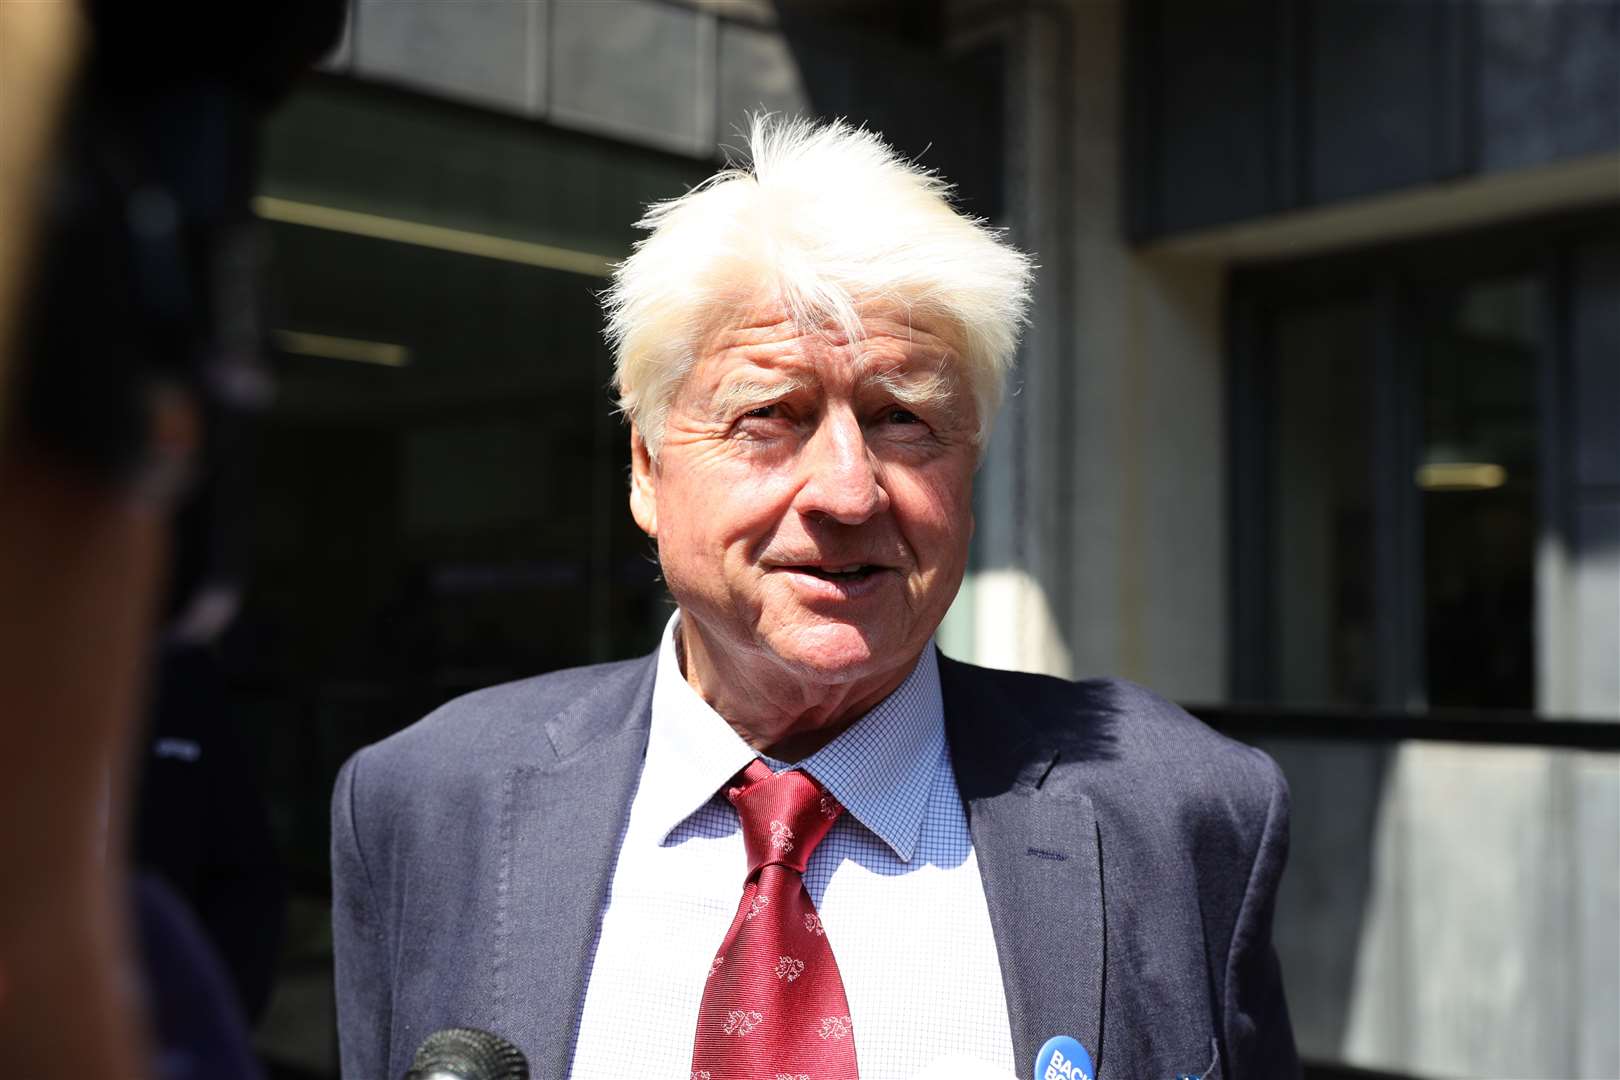 Stanley Johnson said he was ‘extremely sorry’ after being pictured shopping without wearing a face covering (Aaron Chown/PA)